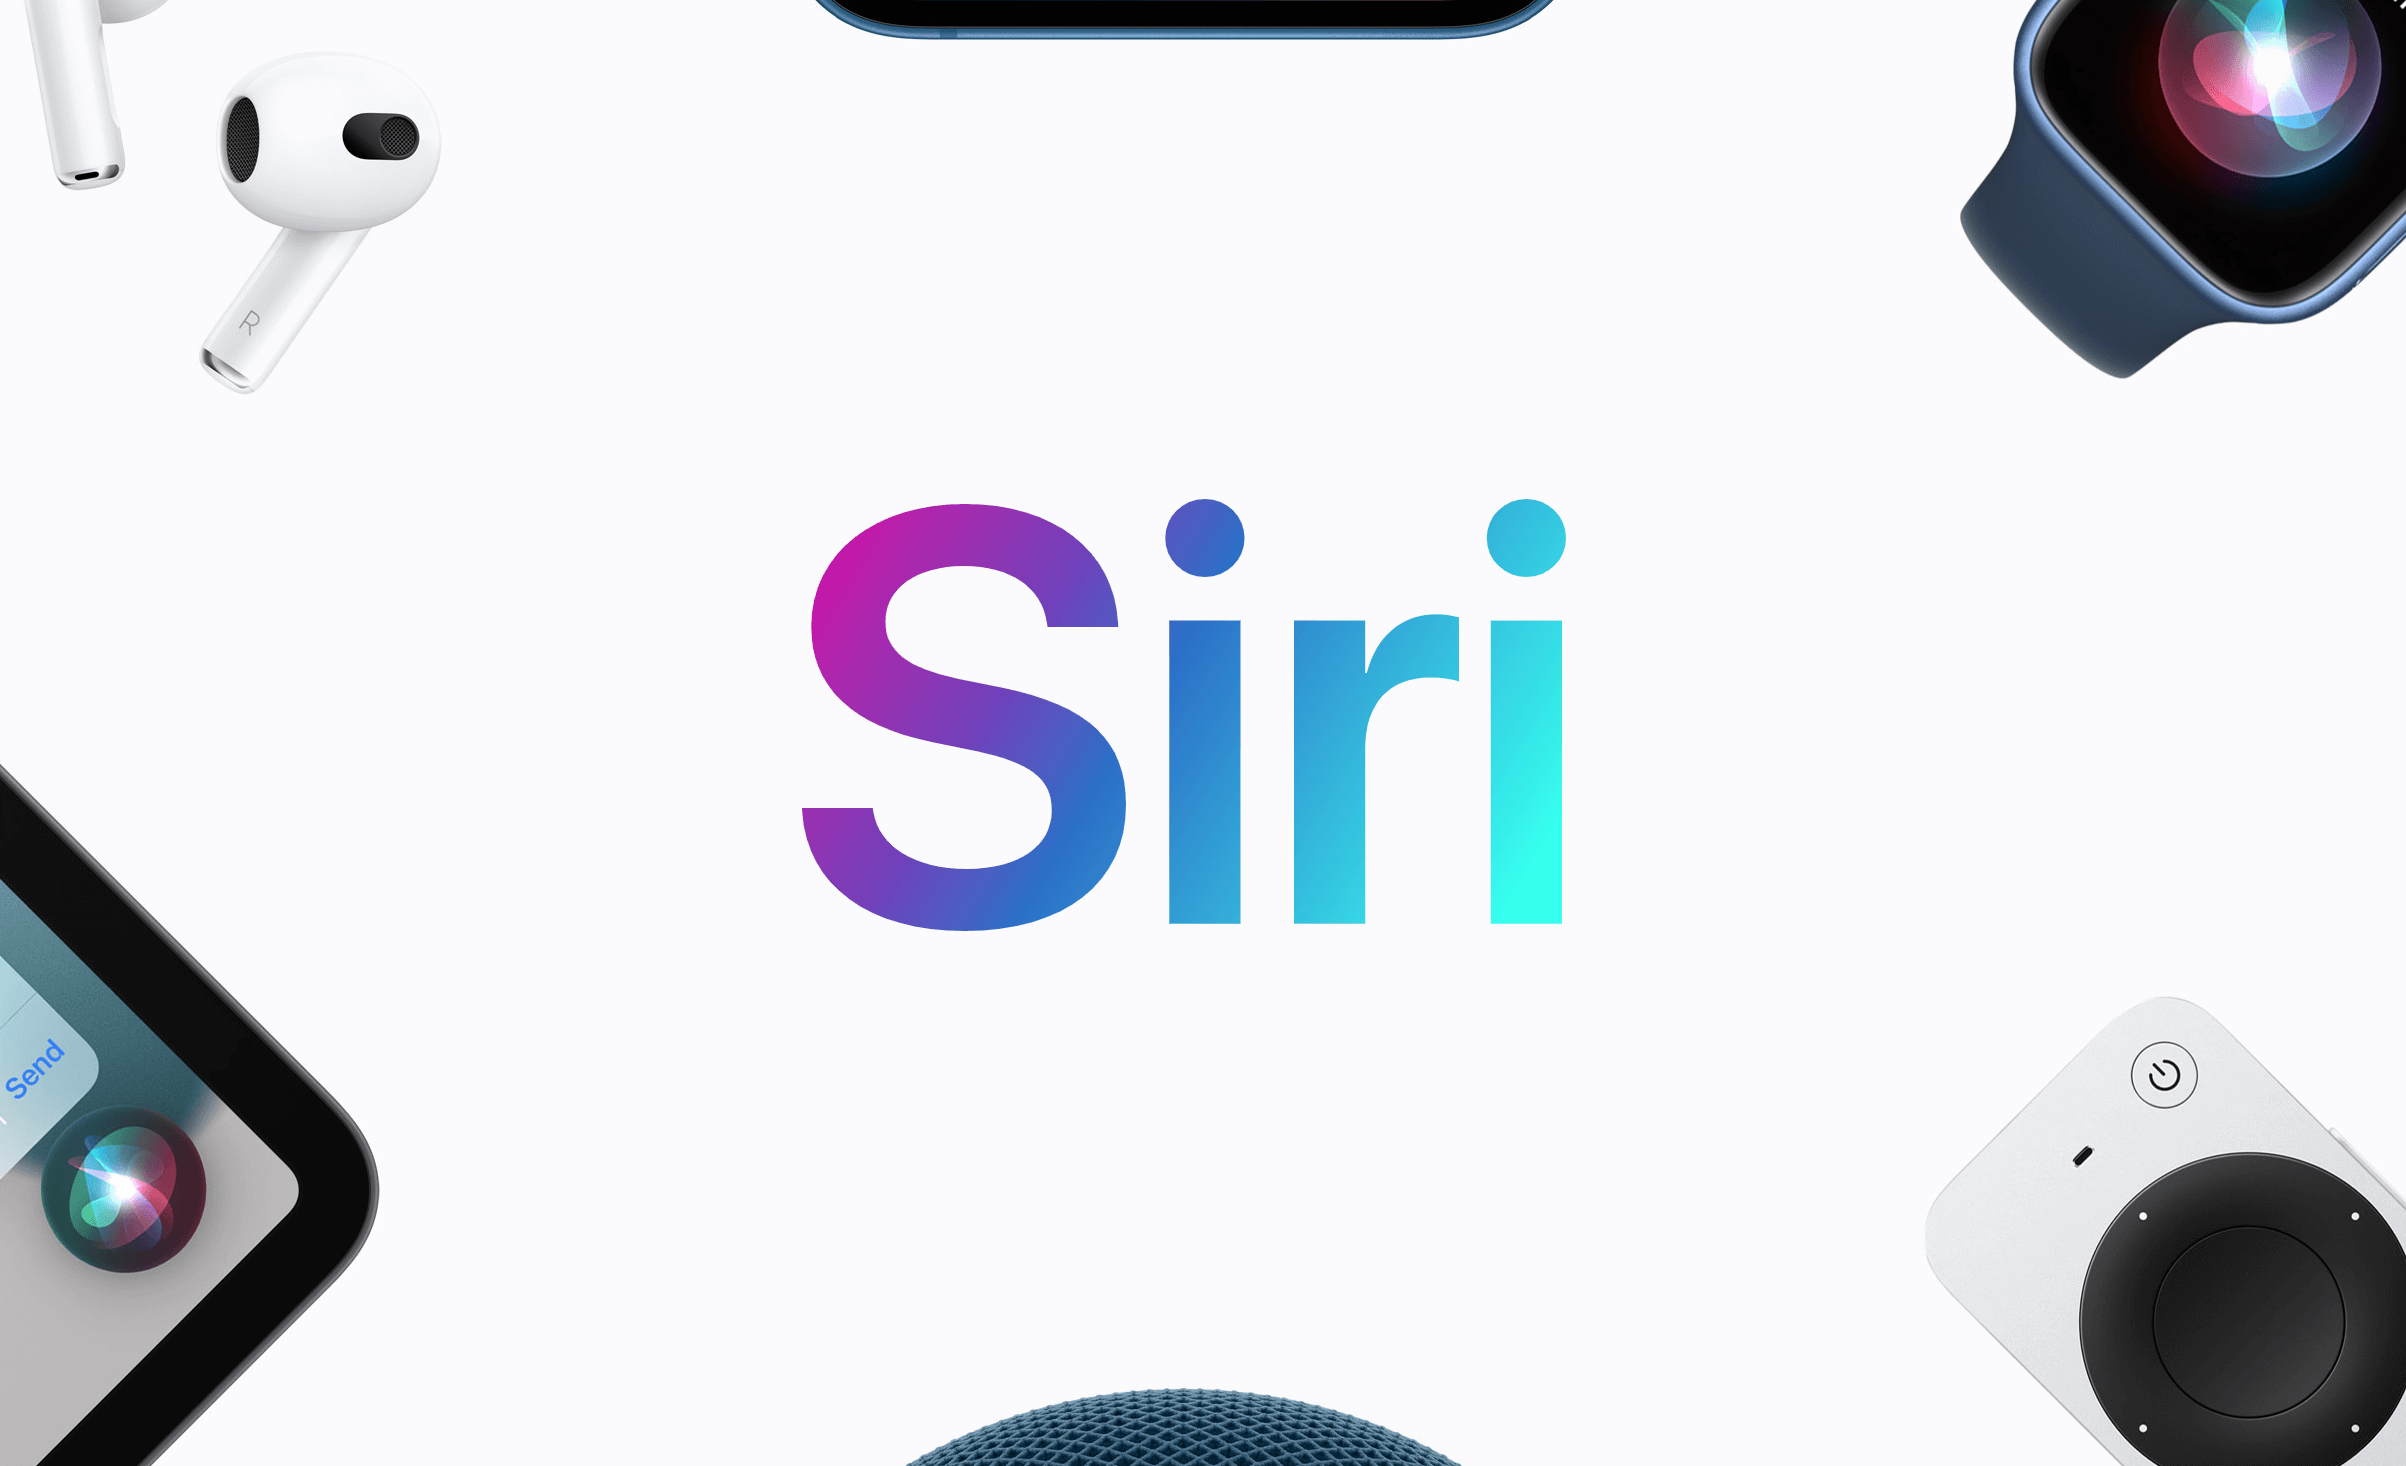 The page of Apple's website dedicated to Siri